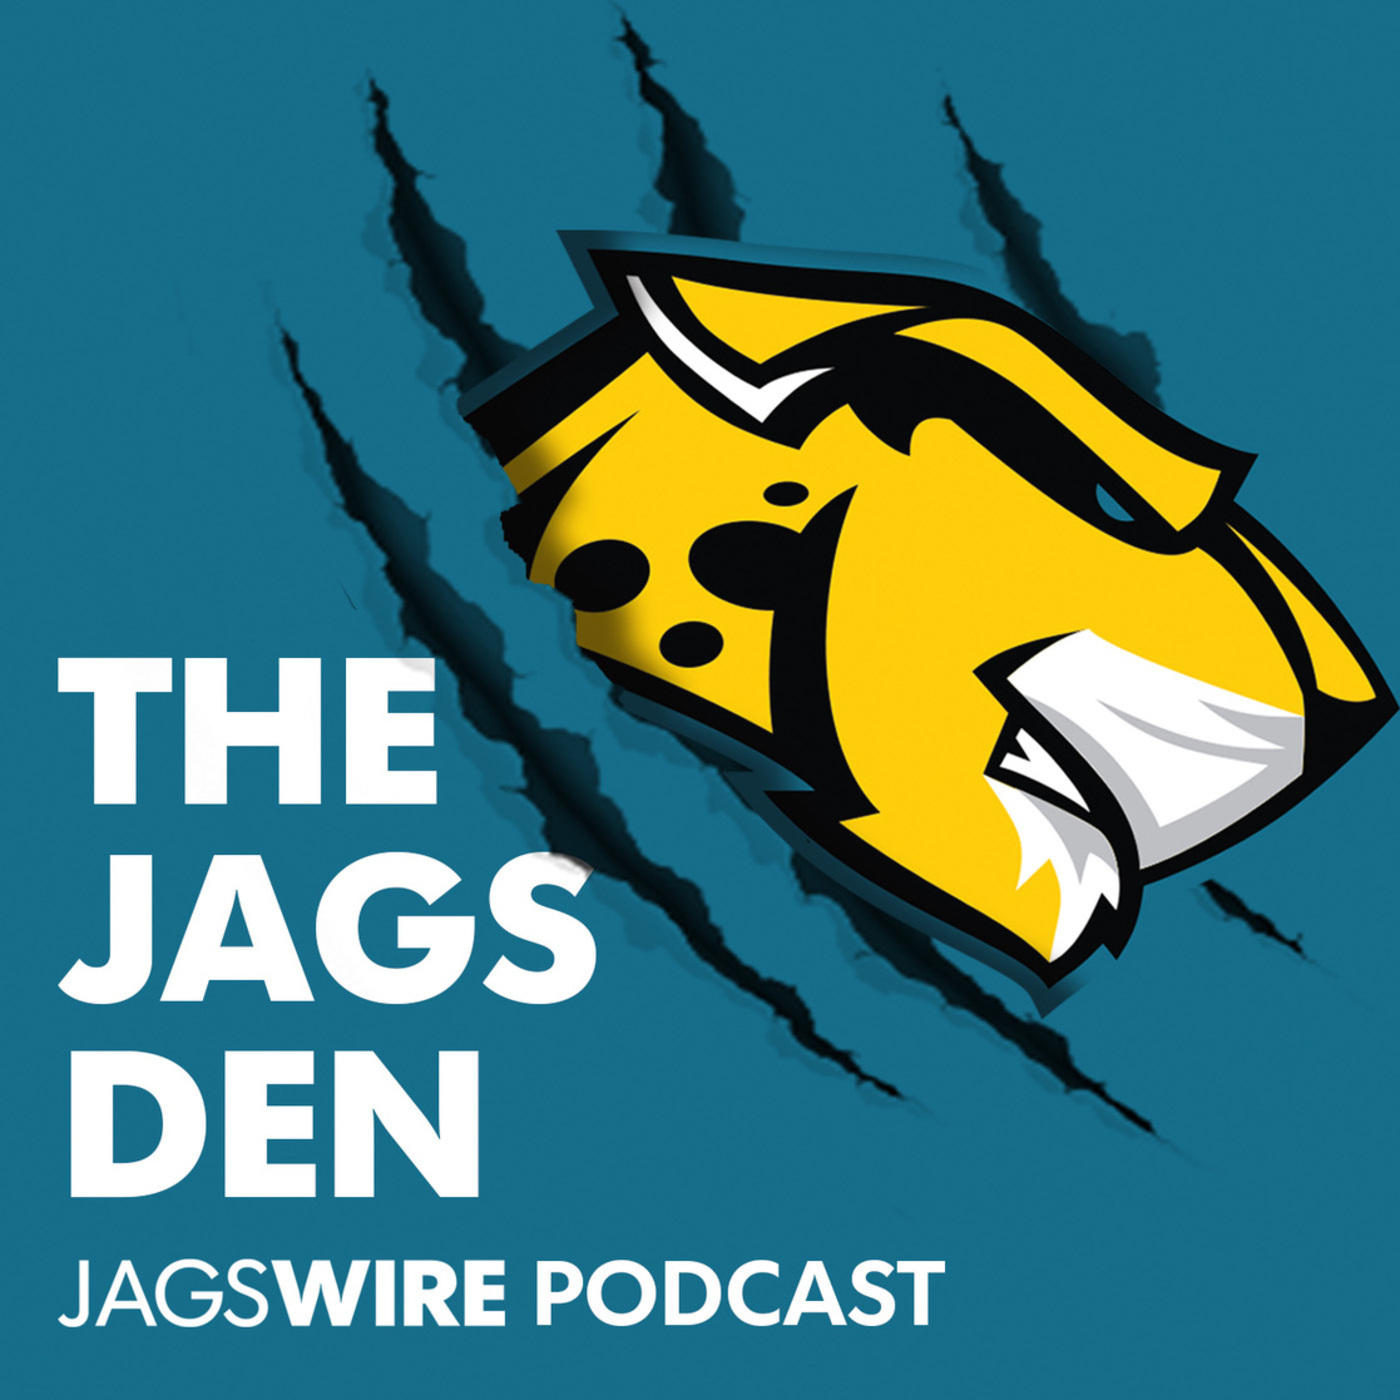 Jags Den Podcast Ep. 12: Arden Franklyn of Colts Wire joins the show to talk Jags vs. Colts